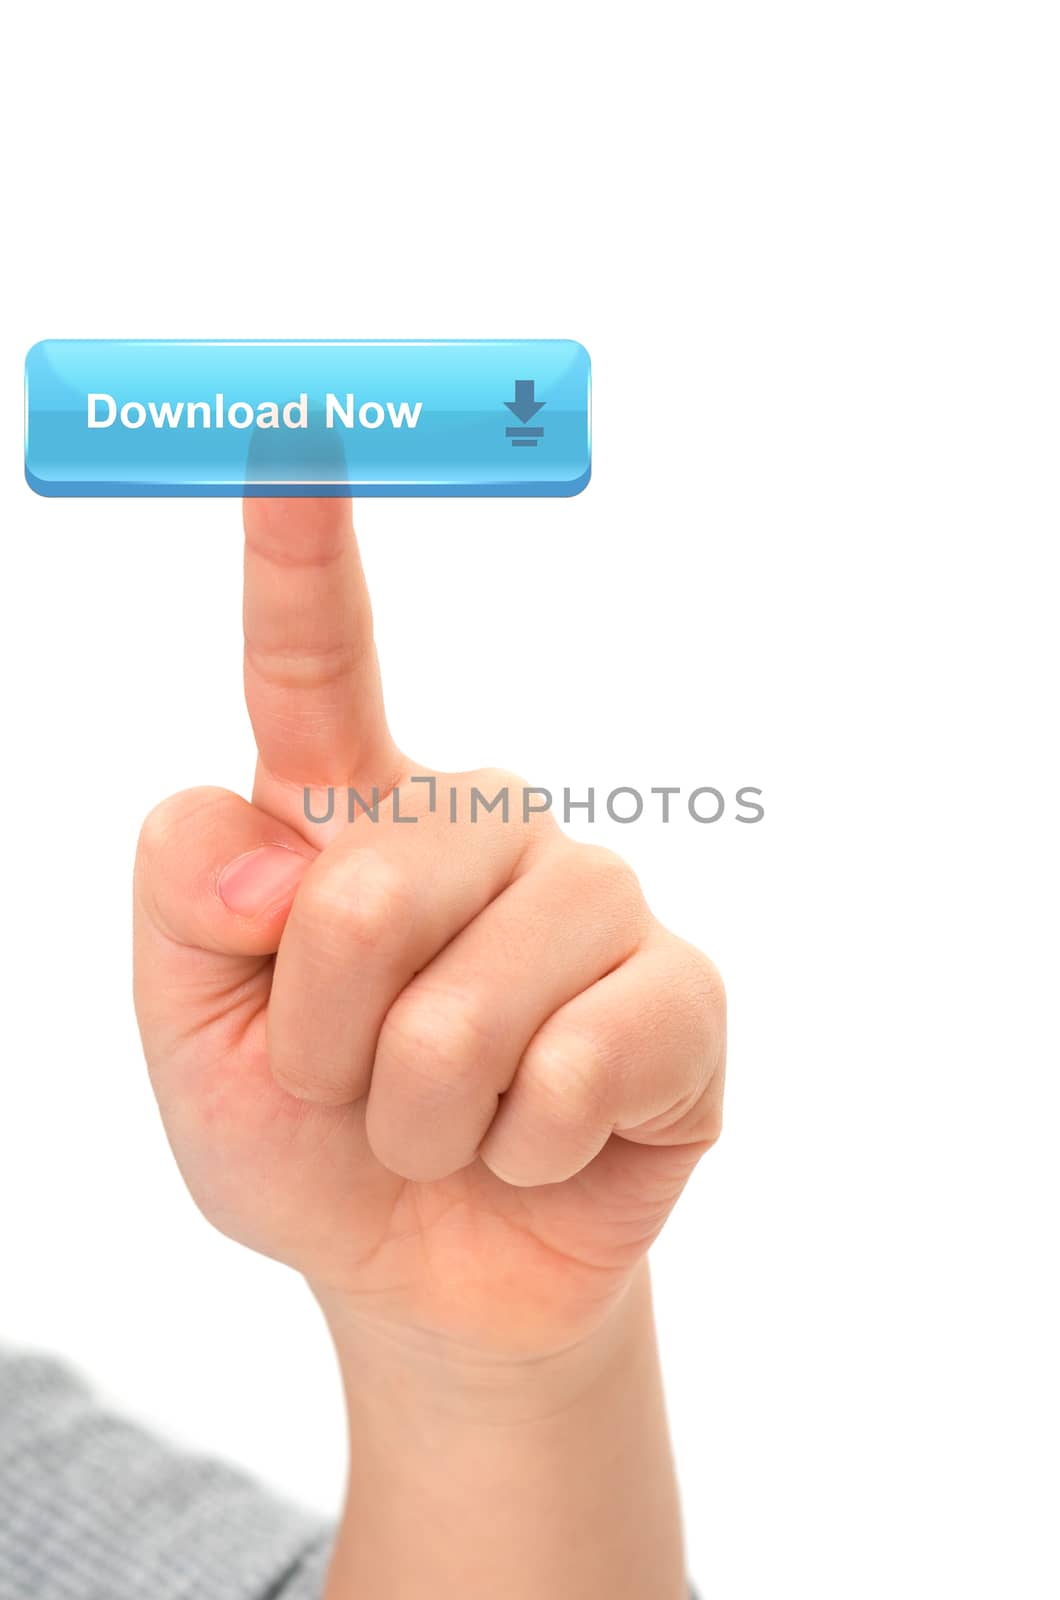 Asian Child finger Touching a download button on virtual screen  by daoleduc